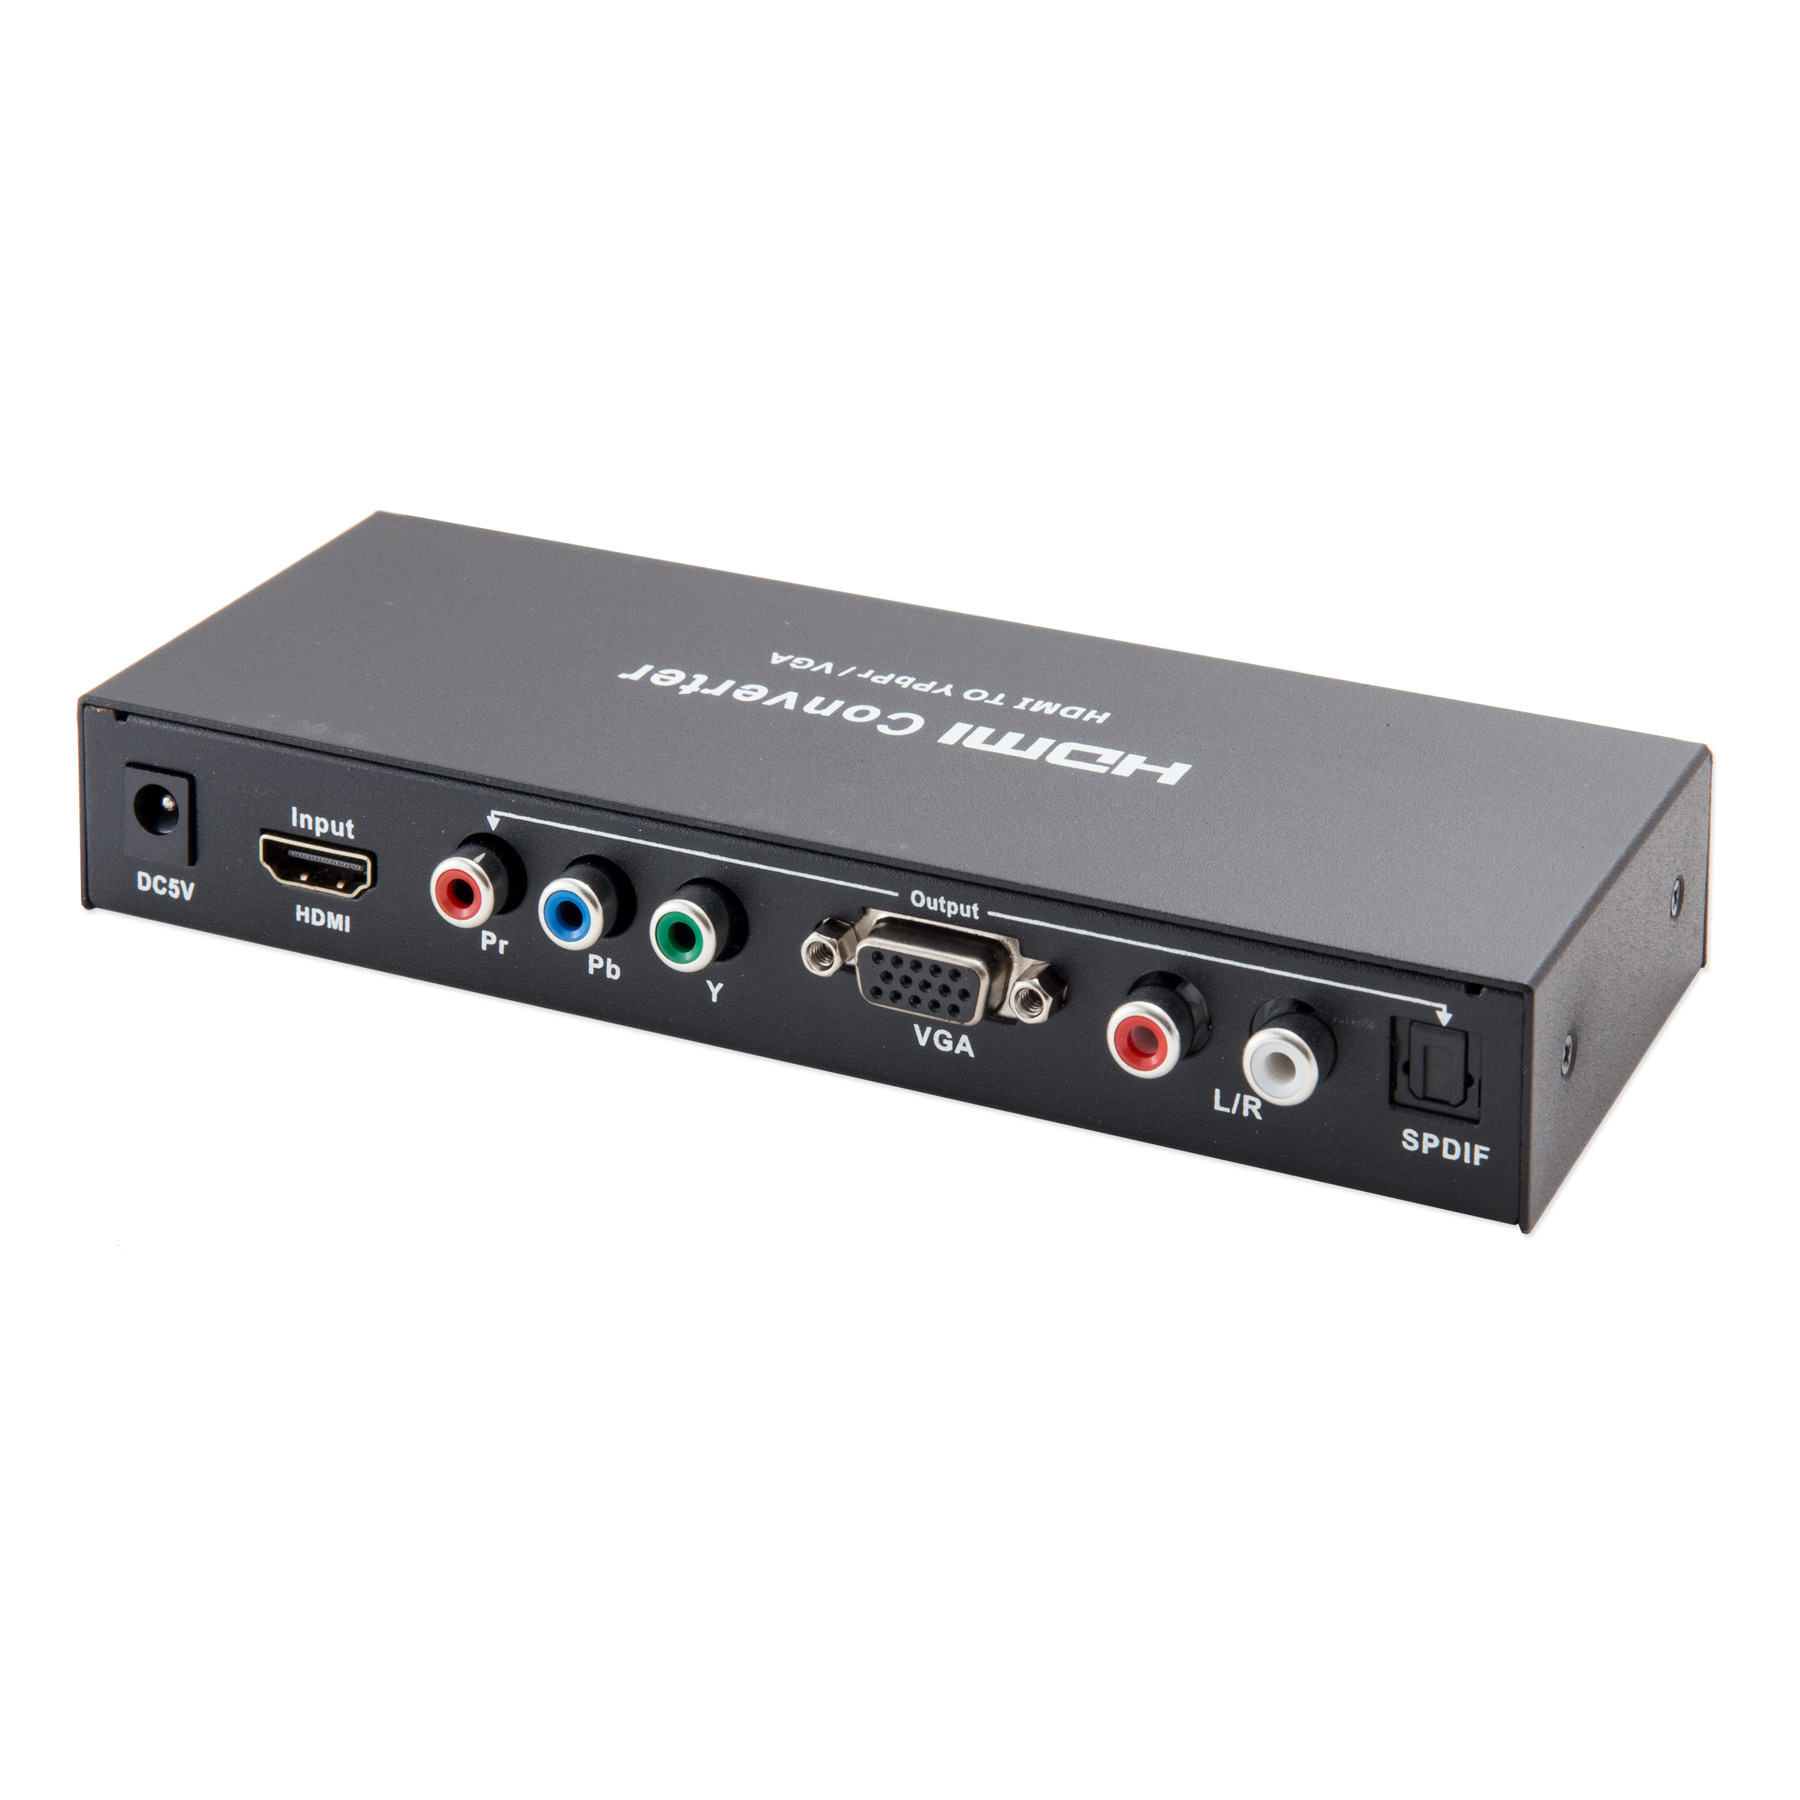 HDMI to VGA+YPbPr+Audio Converter, Input Signal Connection (HDMI), Output Signal Connections (YPbPr, VGA), Output Audio Connections (L/R Analog, SPDIF), Video Output up to 1080p, Black Color - image 5 of 5